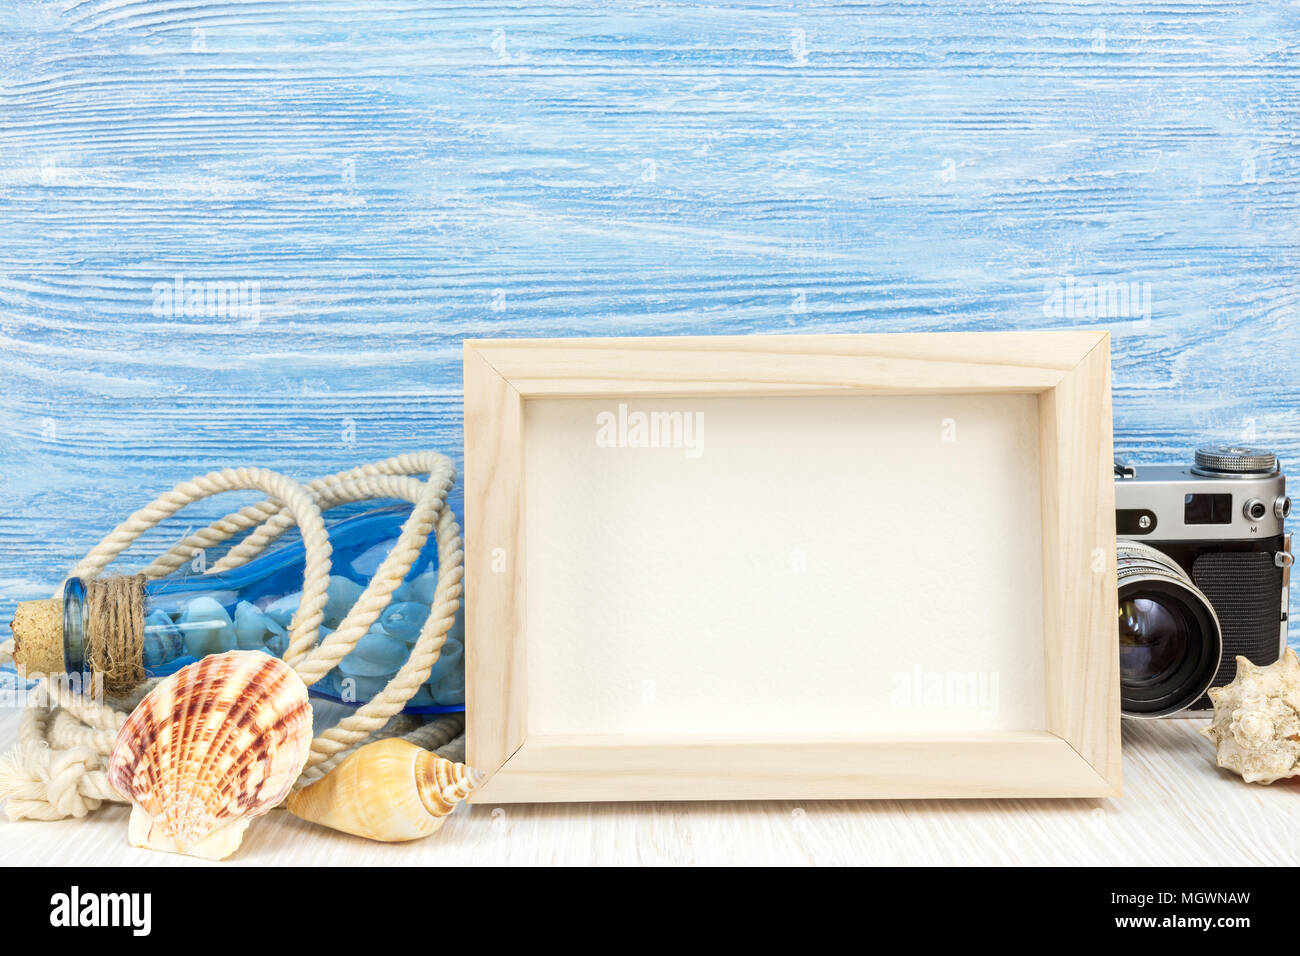 empty photo frame, seashells, bottle and classic camera on blue wooden background. vacation concept Stock Photo